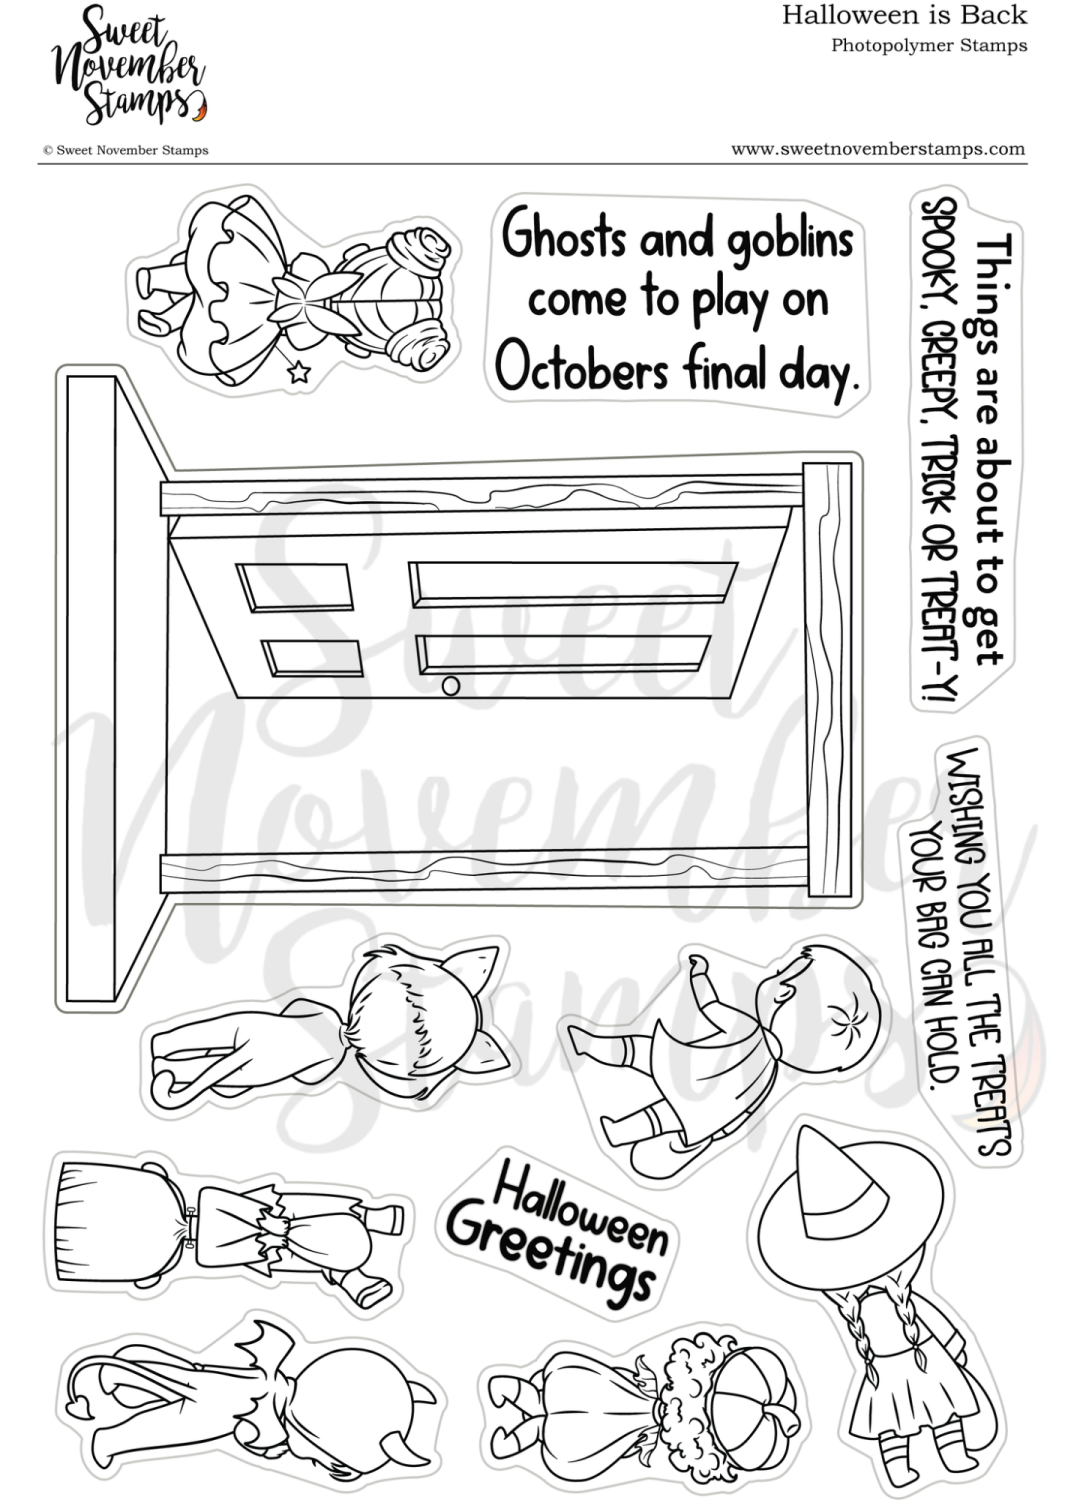 ****NEW**** Sweet November - Halloween is Back Clear stamp set